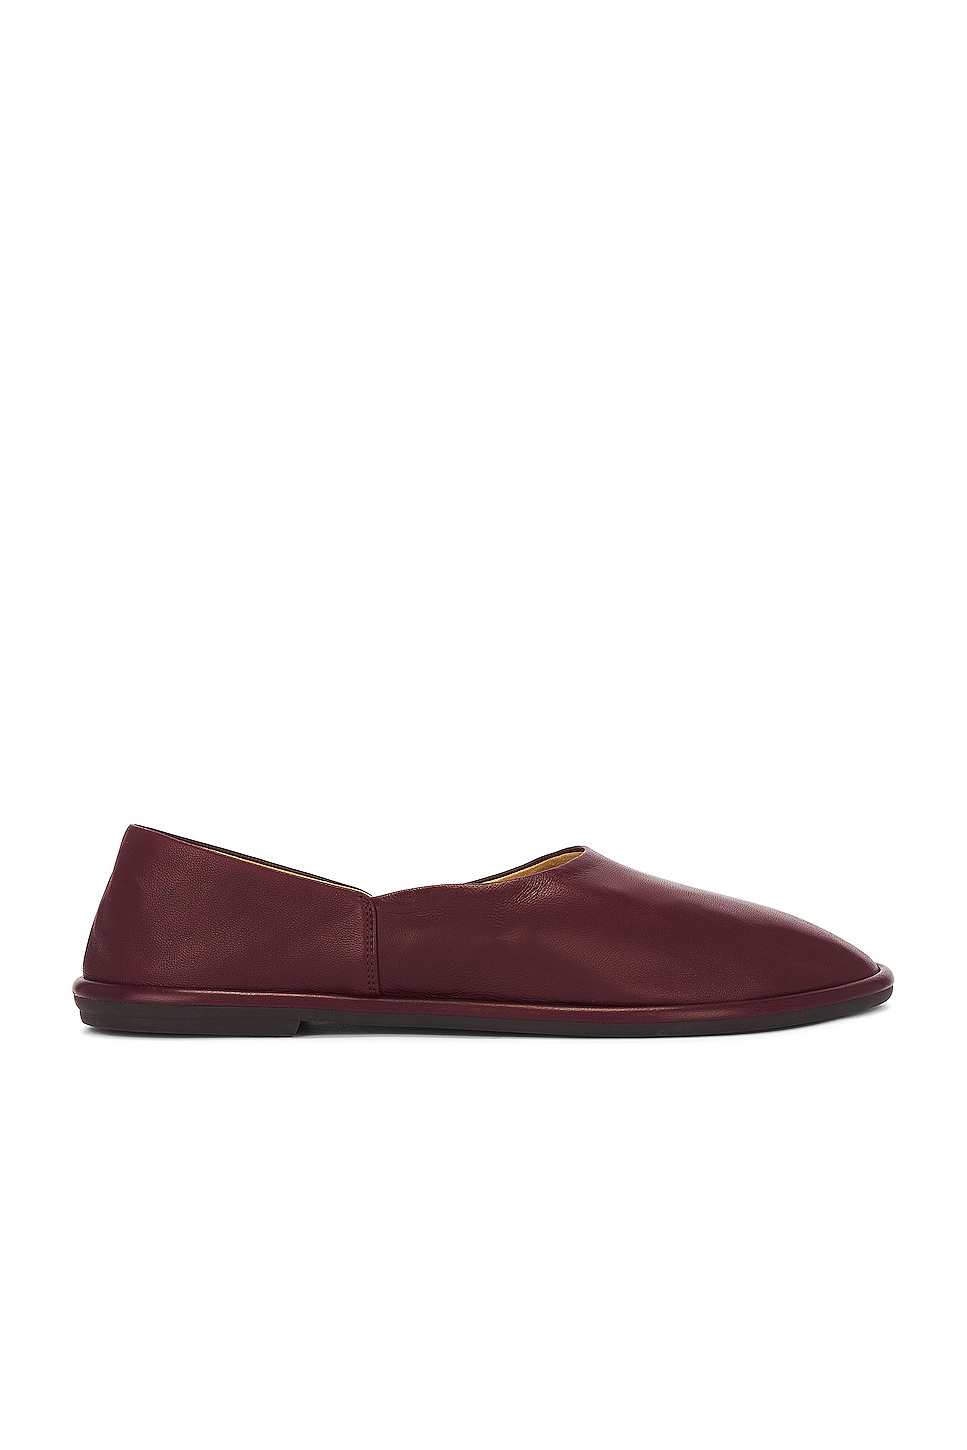 Image 1 of The Row Canal Slip On Slippers in Dark Burgundy